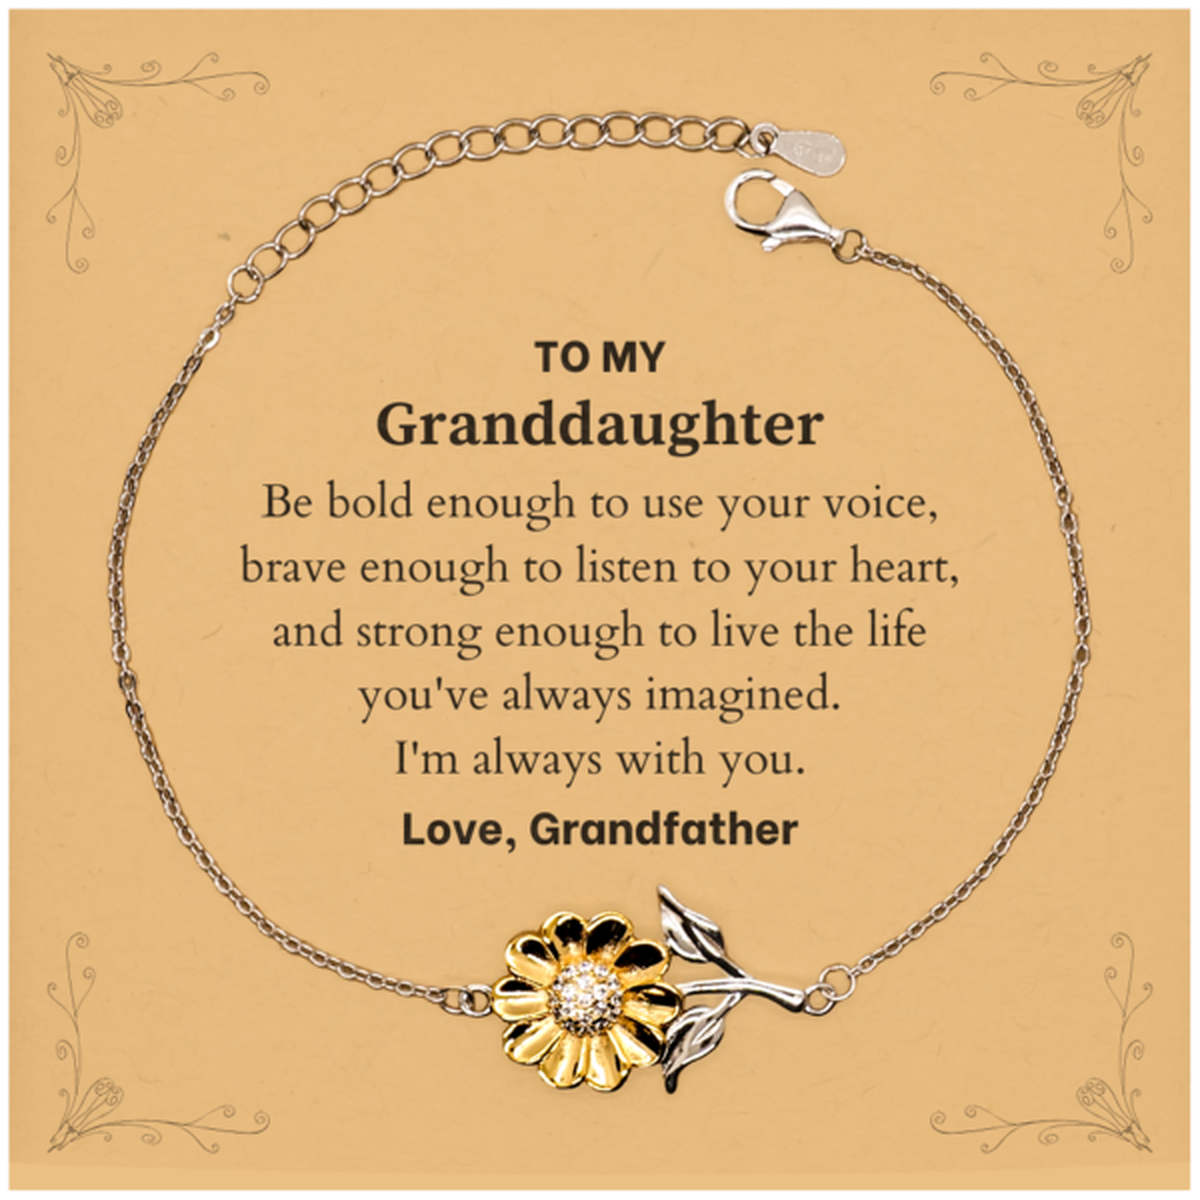 Keepsake Granddaughter Sunflower Bracelet Gift Idea Graduation Christmas Birthday Granddaughter from Grandfather, Granddaughter Be bold enough to use your voice, brave enough to listen to your heart. Love, Grandfather